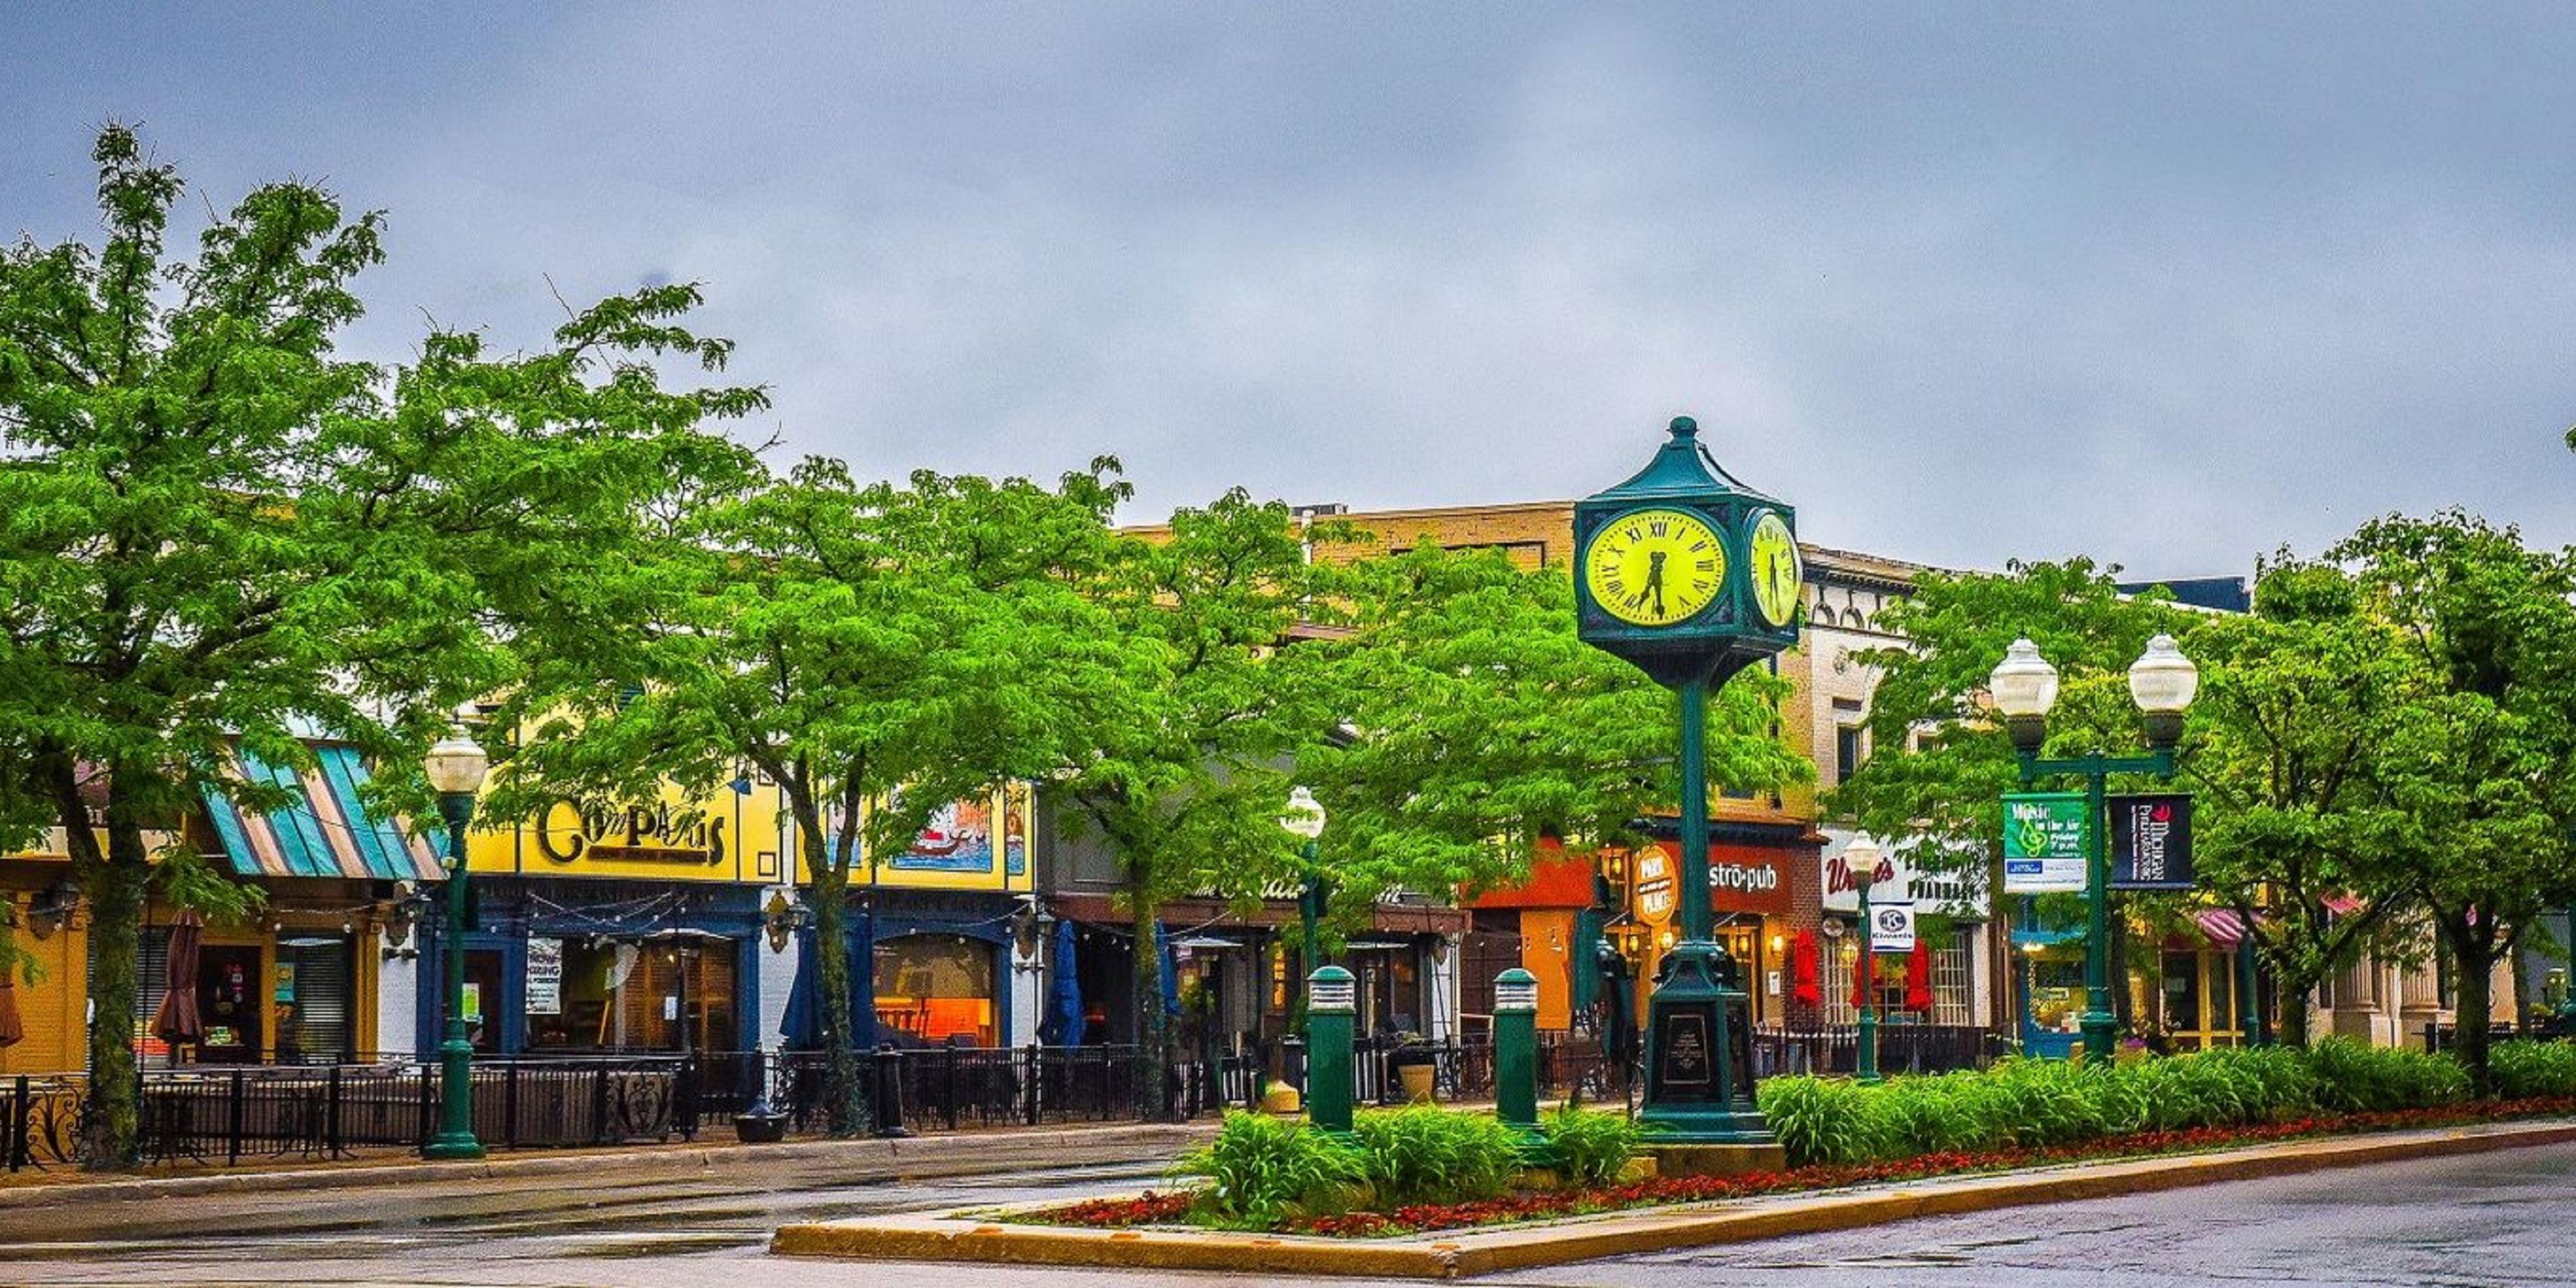 Visit downtown Plymouth where, "It's Not Just a Walk in the Park!" The beautiful Kellogg Park is Plymouth's signature landmark, but as you explore downtown, you will also find an eclectic gathering of shops, apparel stores, eateries, bars, entertainment, and salons and spas.